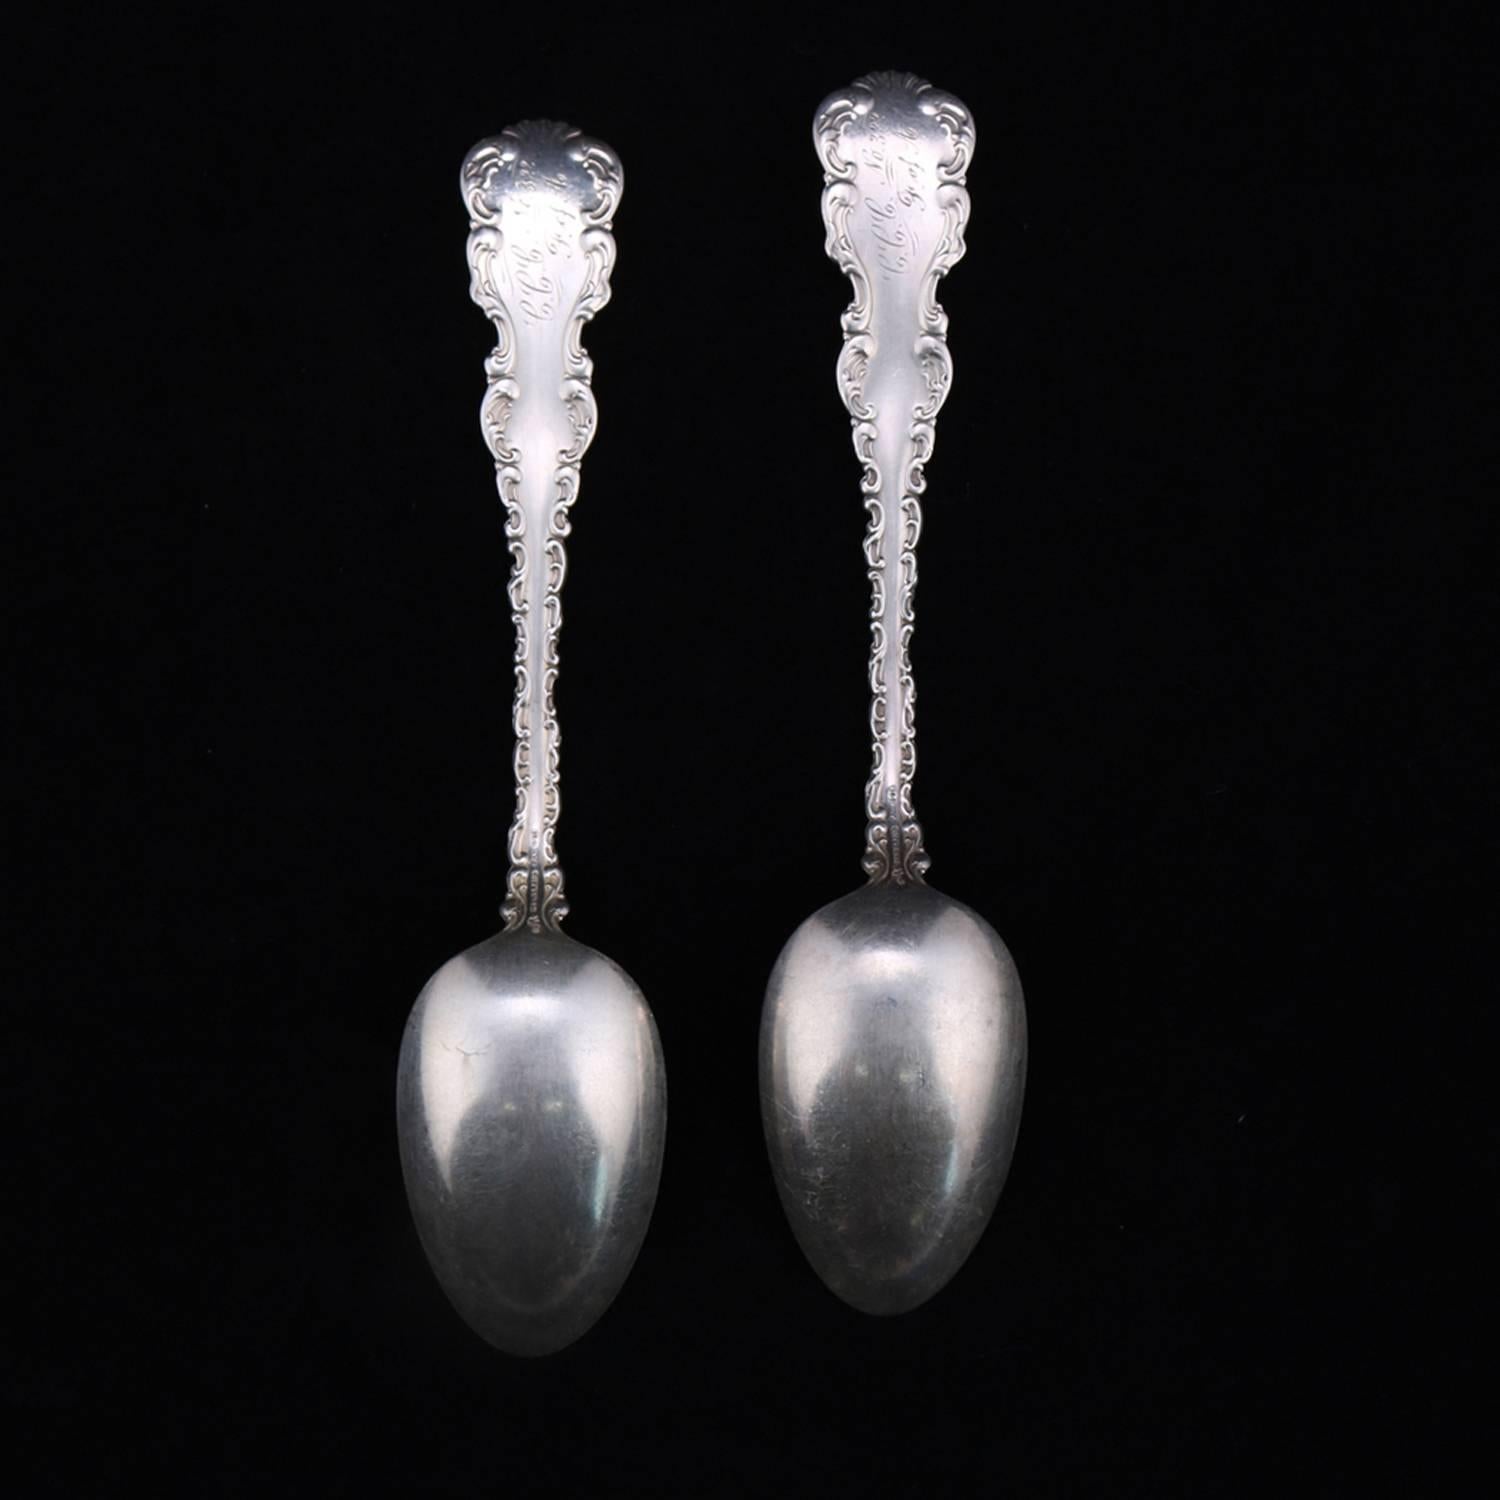 Pair of sterling silver tablespoons feature shaped handles with foliate decoration and central monogram, en verso whiting sterling silver, 3.44 toz, circa 1905

***DELIVERY NOTICE – Due to COVID-19 we are employing NO-CONTACT PRACTICES in the